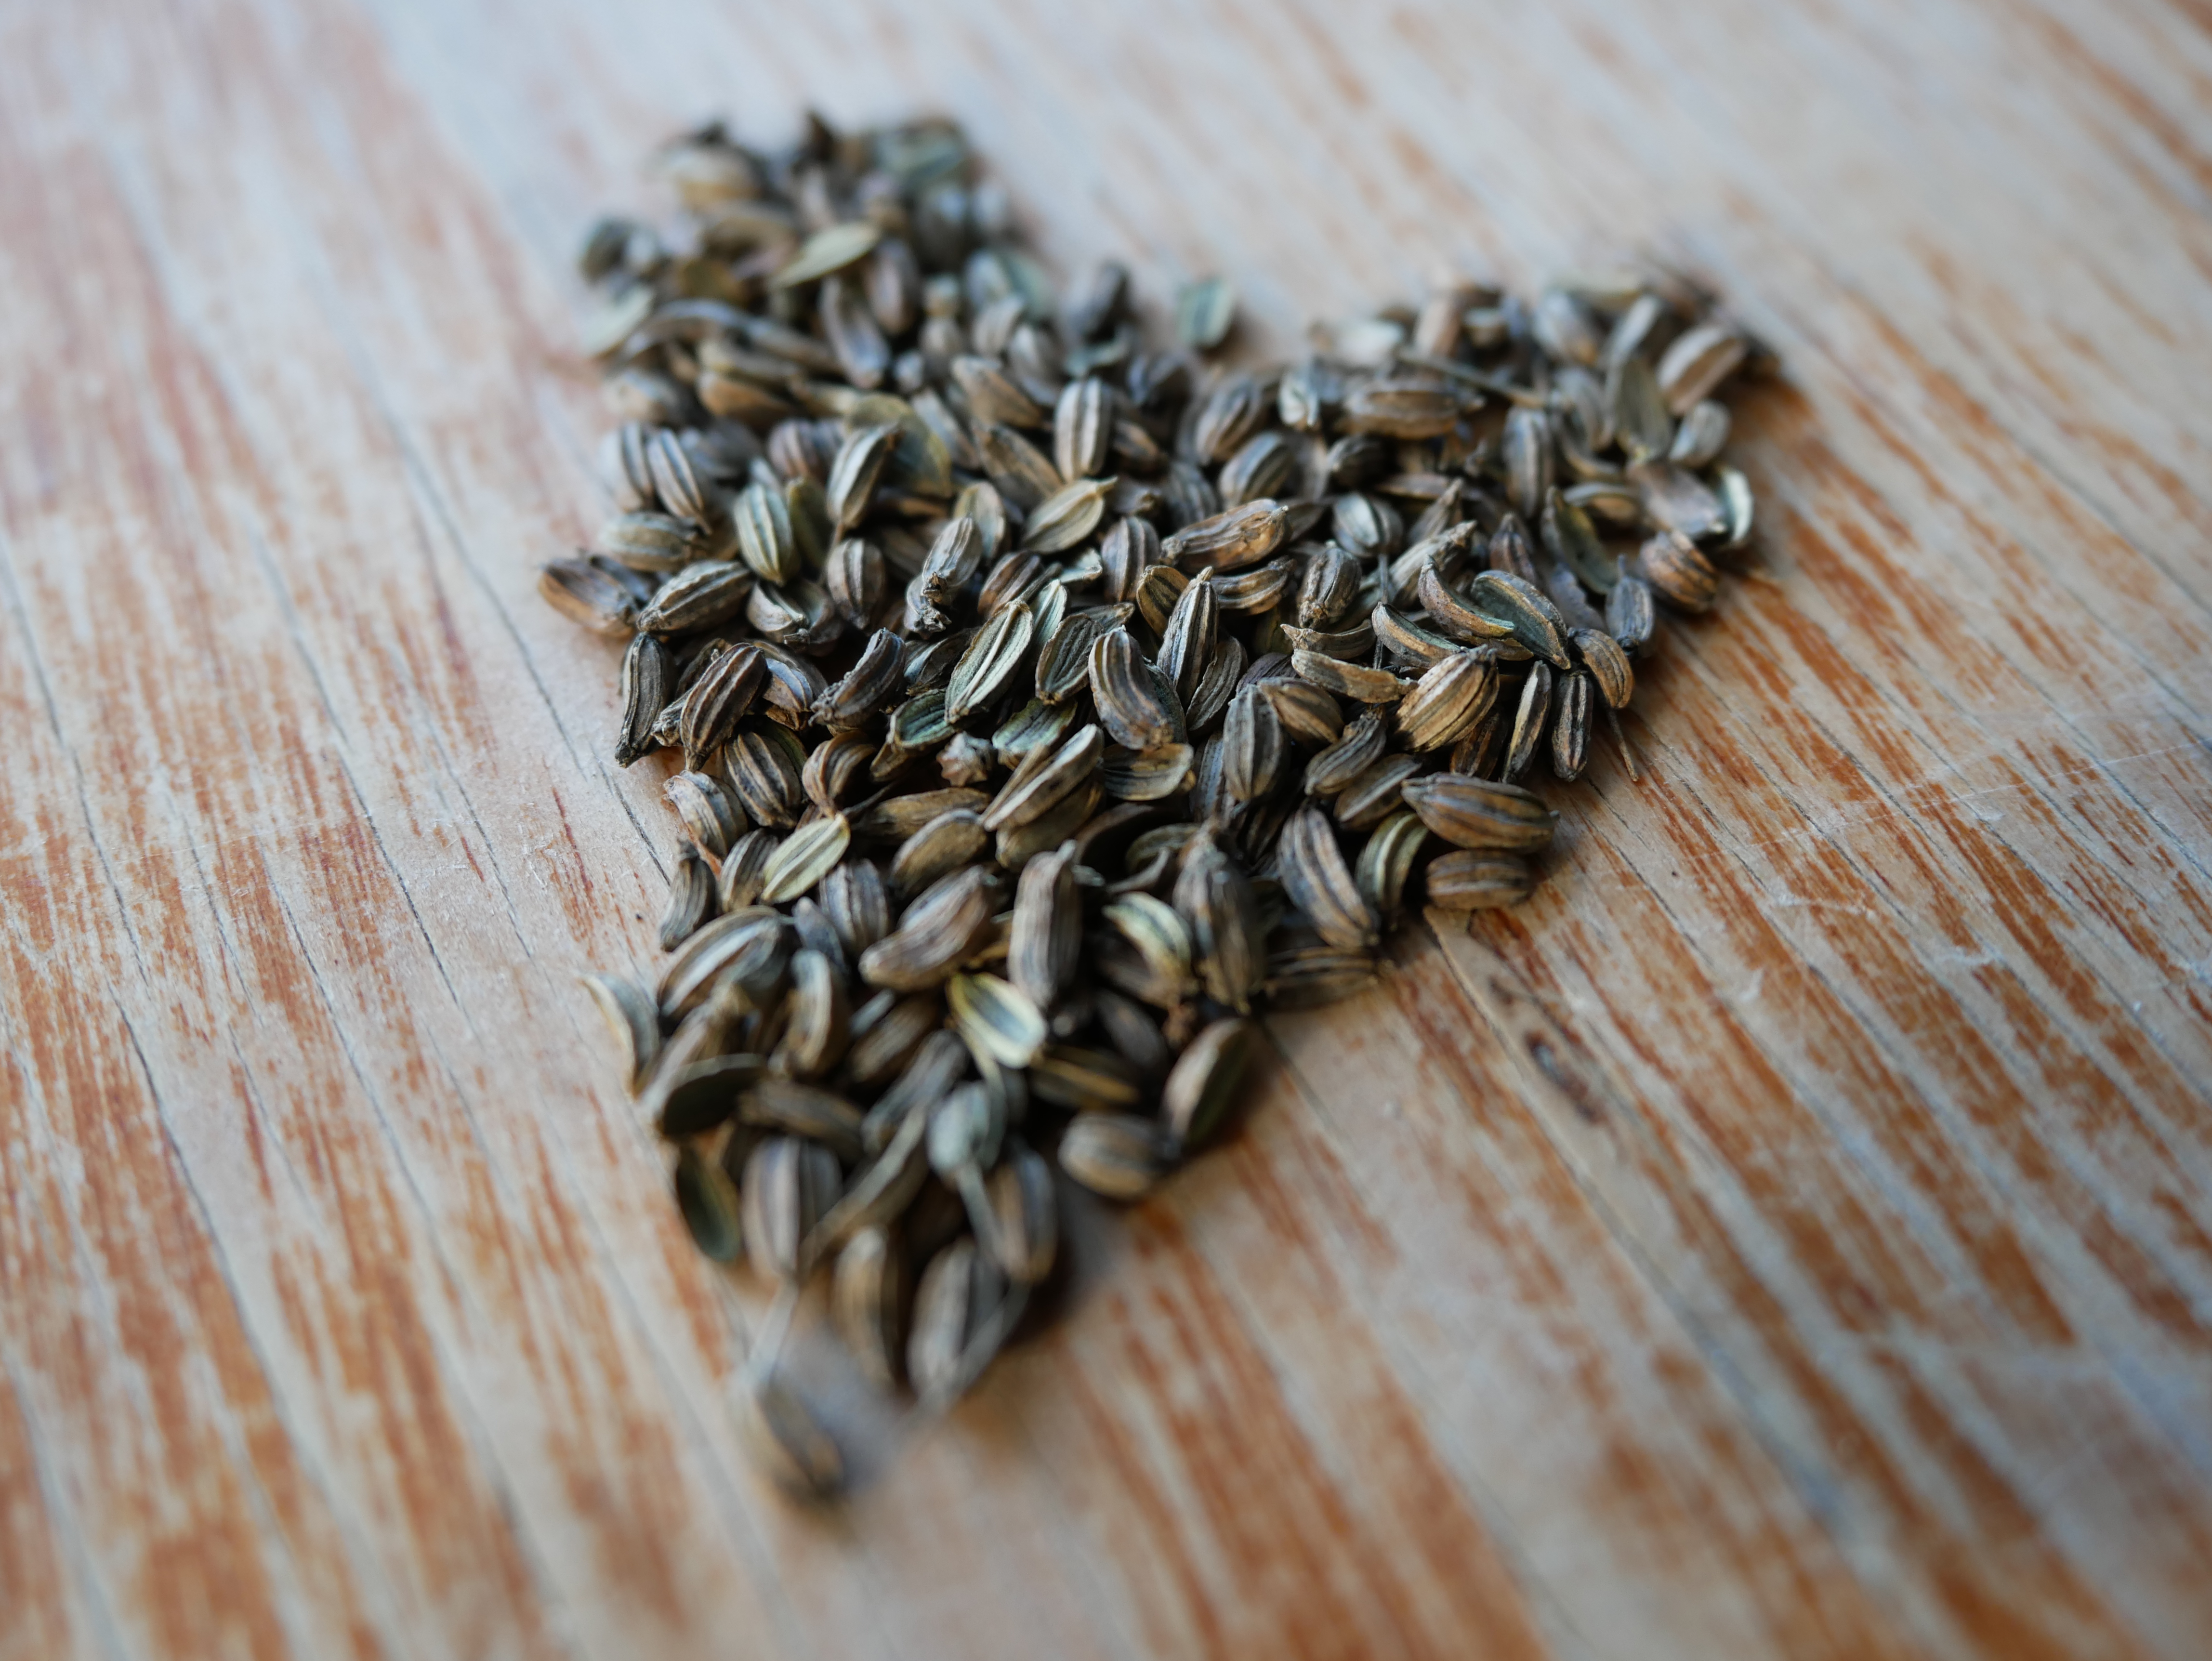 fennel seeds arranged in the shape of a heart